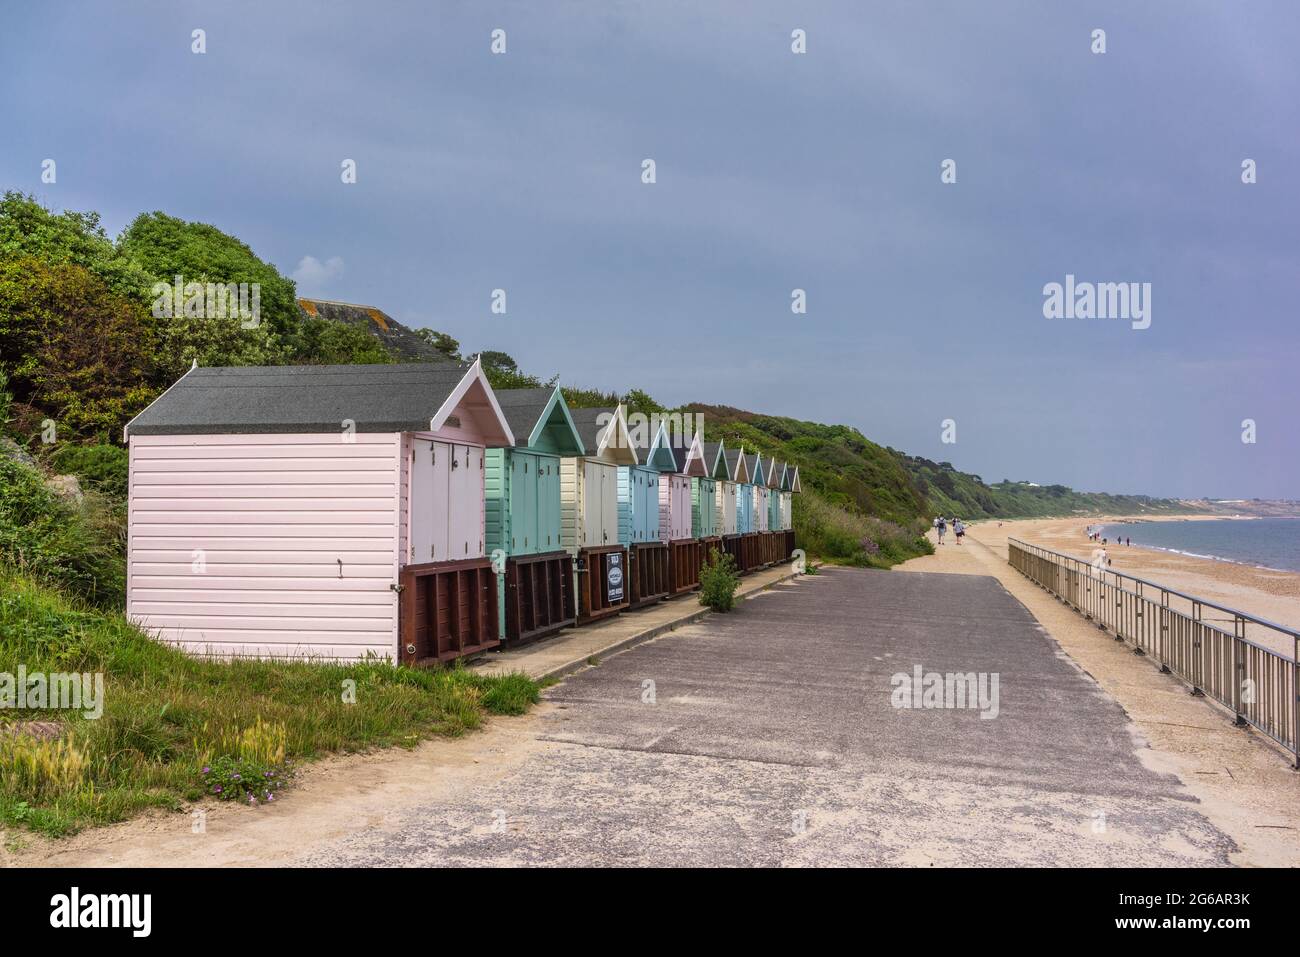 Colourful beach huts and the sea at Friars Cliff Beach in Dorset, England, UK Stock Photo